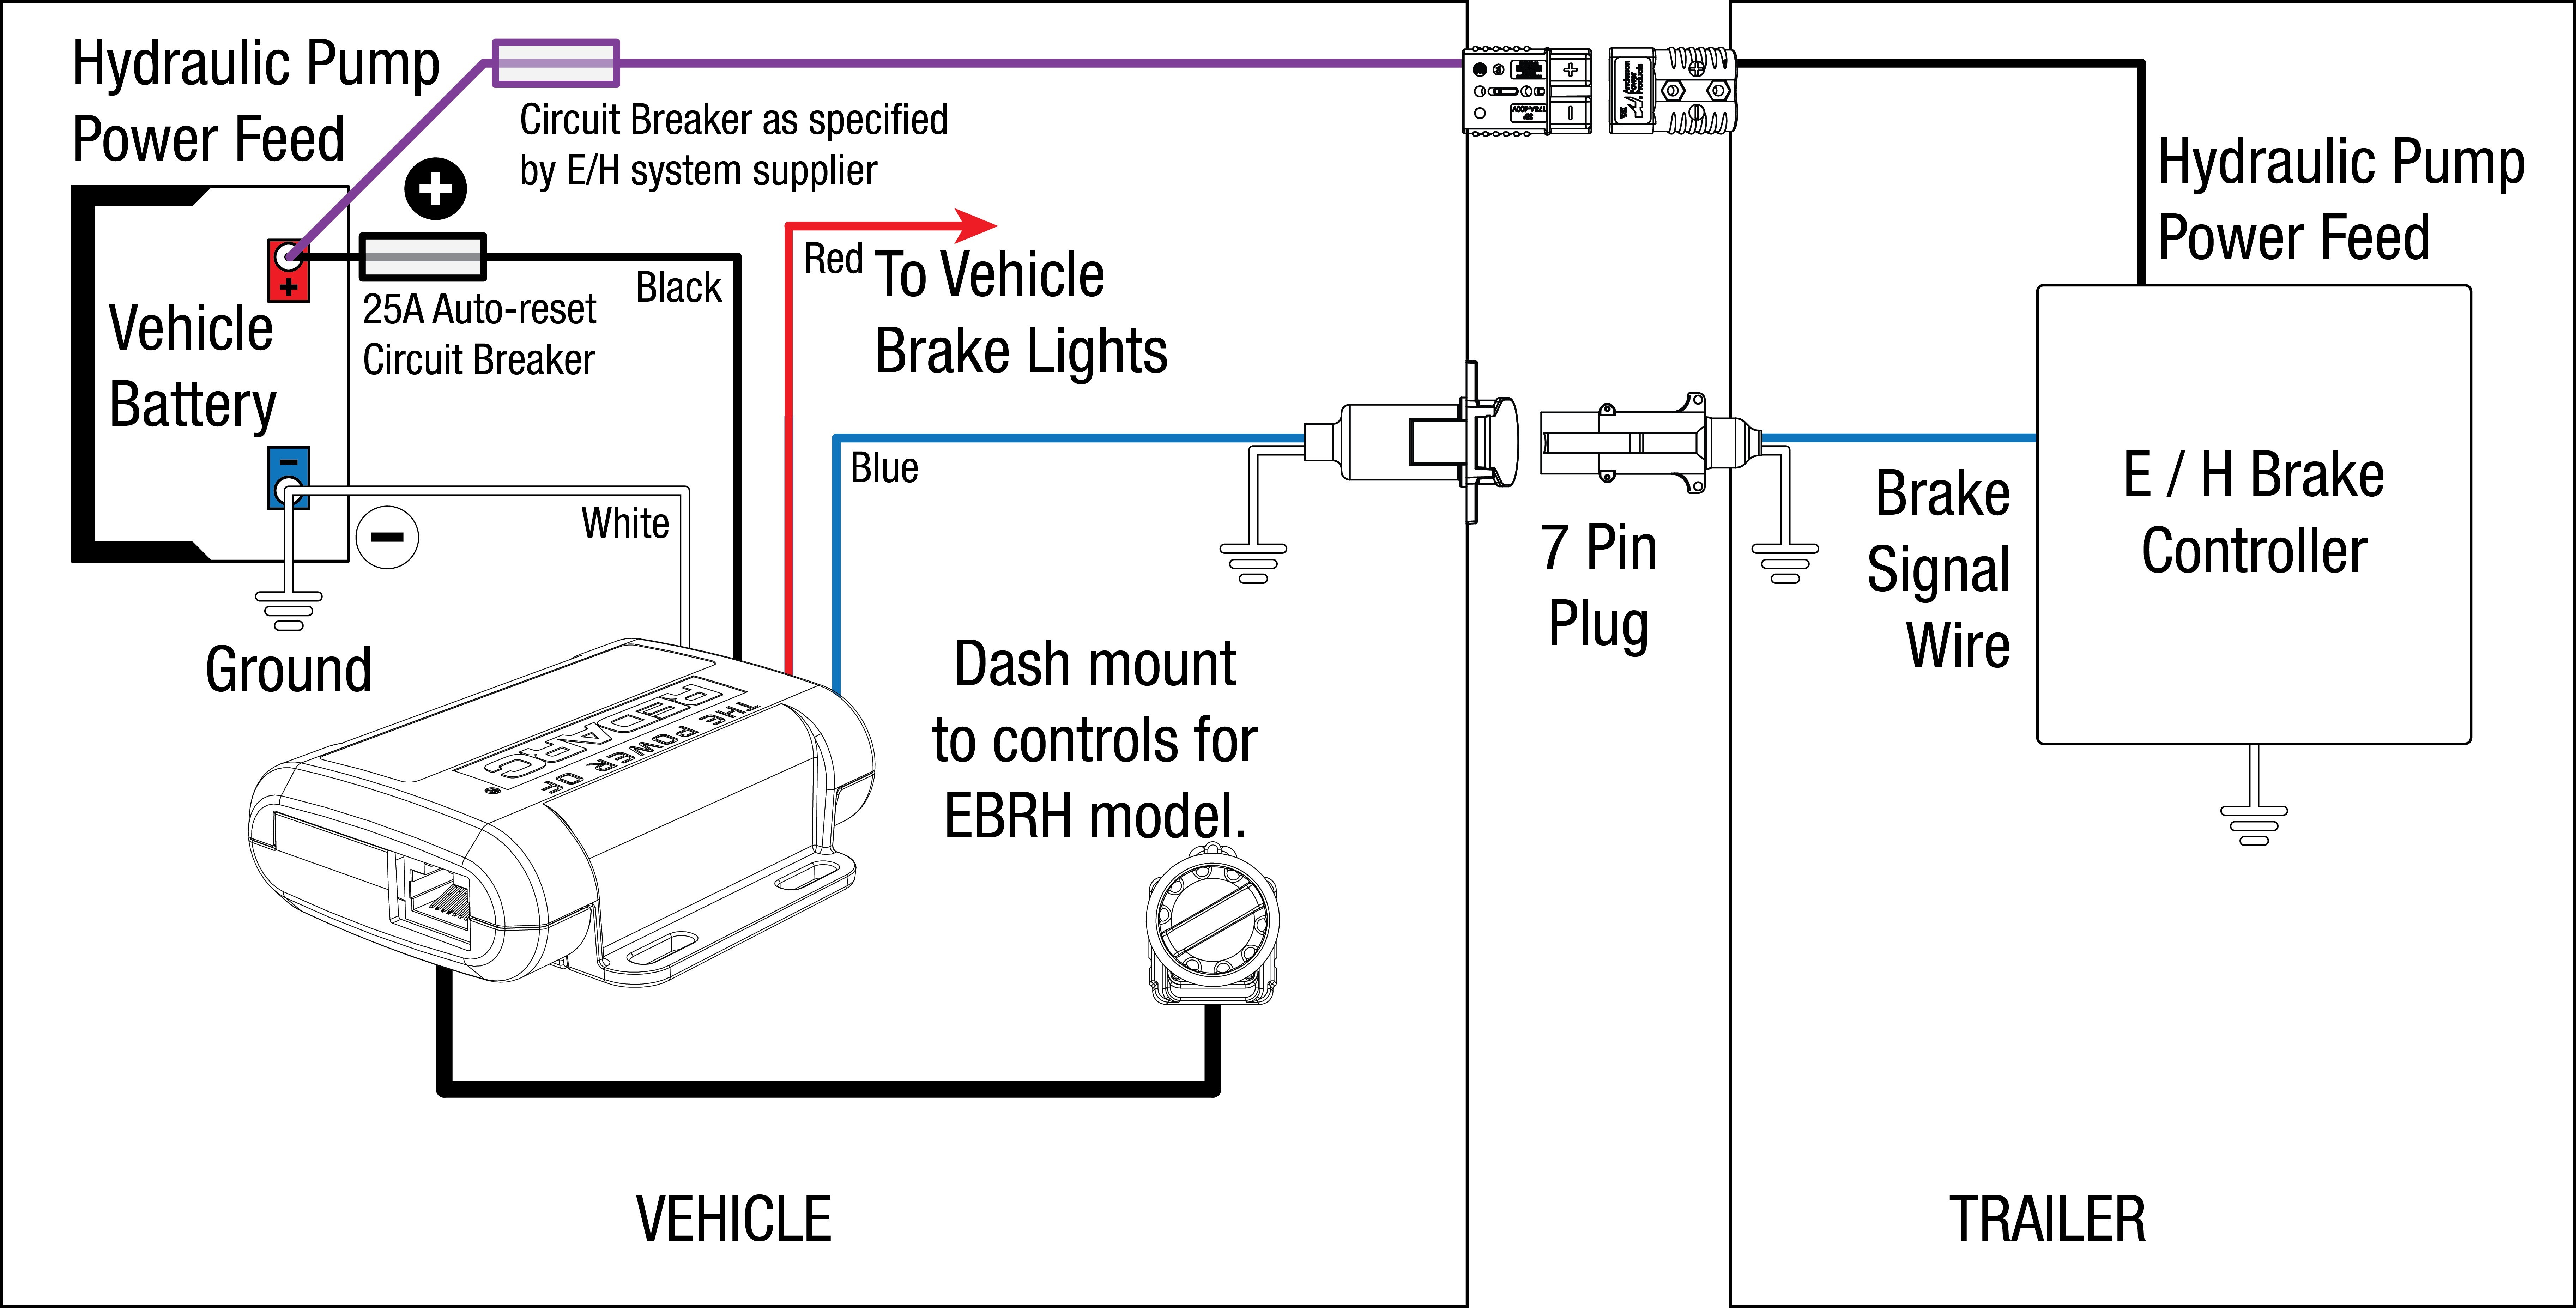 Chevy Tail Light Wiring Diagram Luxury 3 Wire Tail Light Wiring Diagram Diagram Of Chevy Tail Light Wiring Diagram